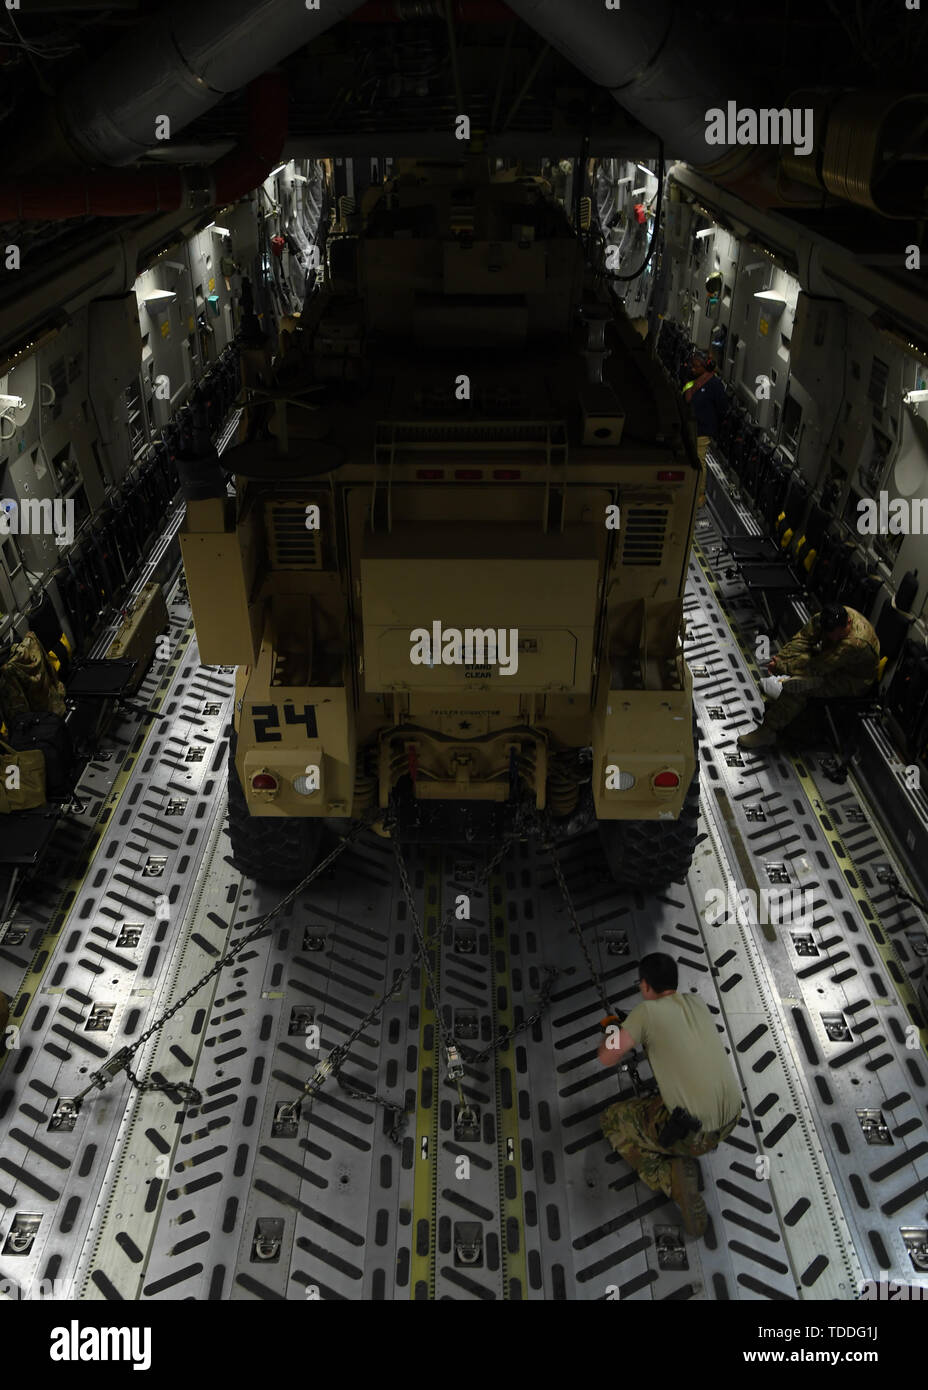 A U.S. Air Force loadmaster from the 816th Expeditionary Airlift Squadron out of Al Udeid Air Base, Qatar, secures a MaxxPro mine-resistant, ambush protected vehicle to a C-17 Globemaster III during a transport mission, June 5, 2019. The 816th EAS provides a constant presence in the region, delivering equipment, supplies and personnel allowing U.S. Air Forces Central Command to leverage and outmatch those seeking to challenge U.S. and coalition interests. (U.S. Air Force photo by Staff Sgt. Chris Drzazgowski) Stock Photo